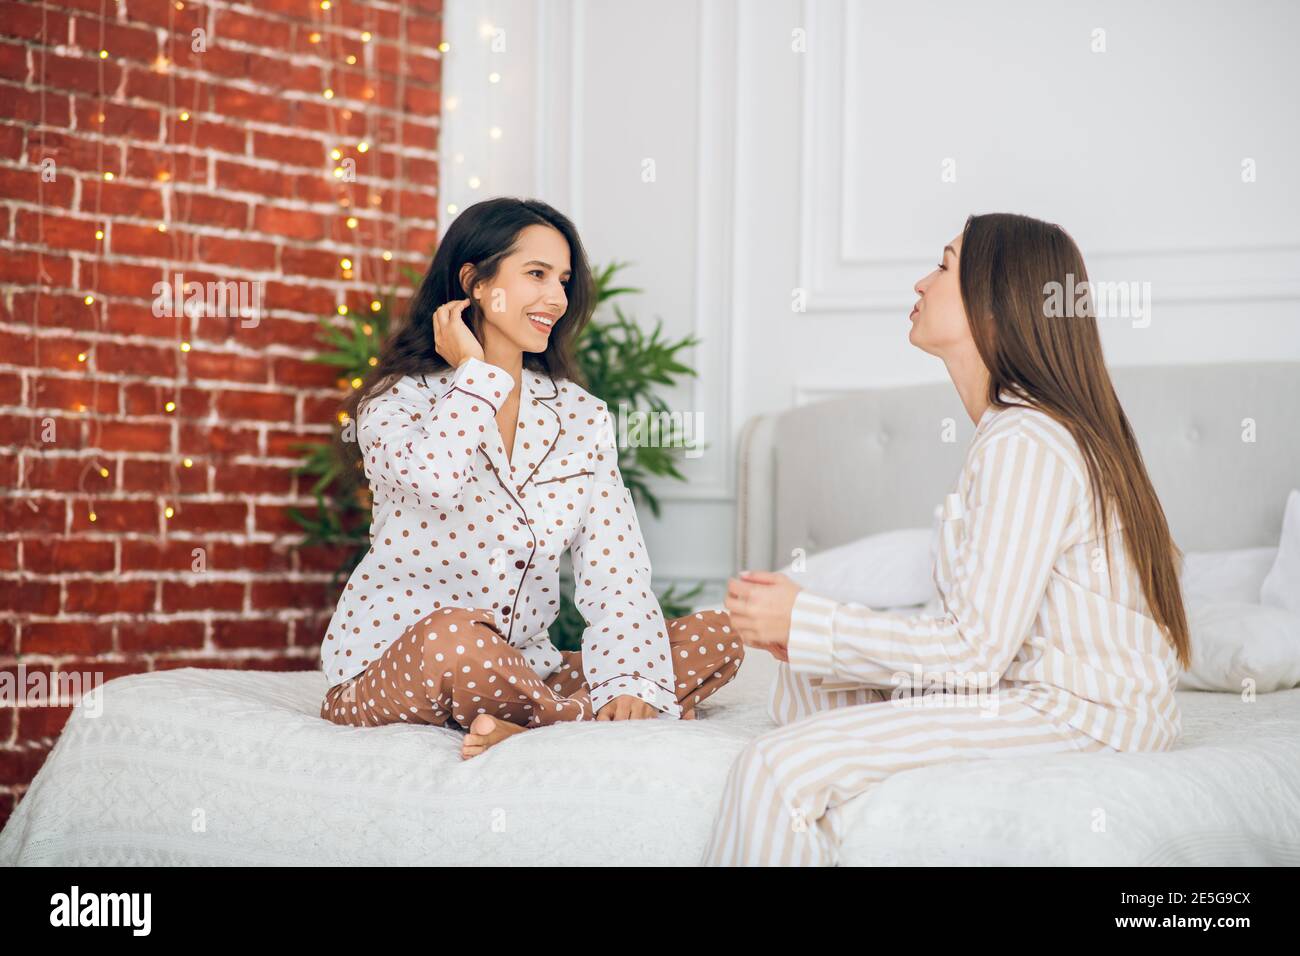 Two young girls in pajamas sitting on a bed and talking Stock Photo